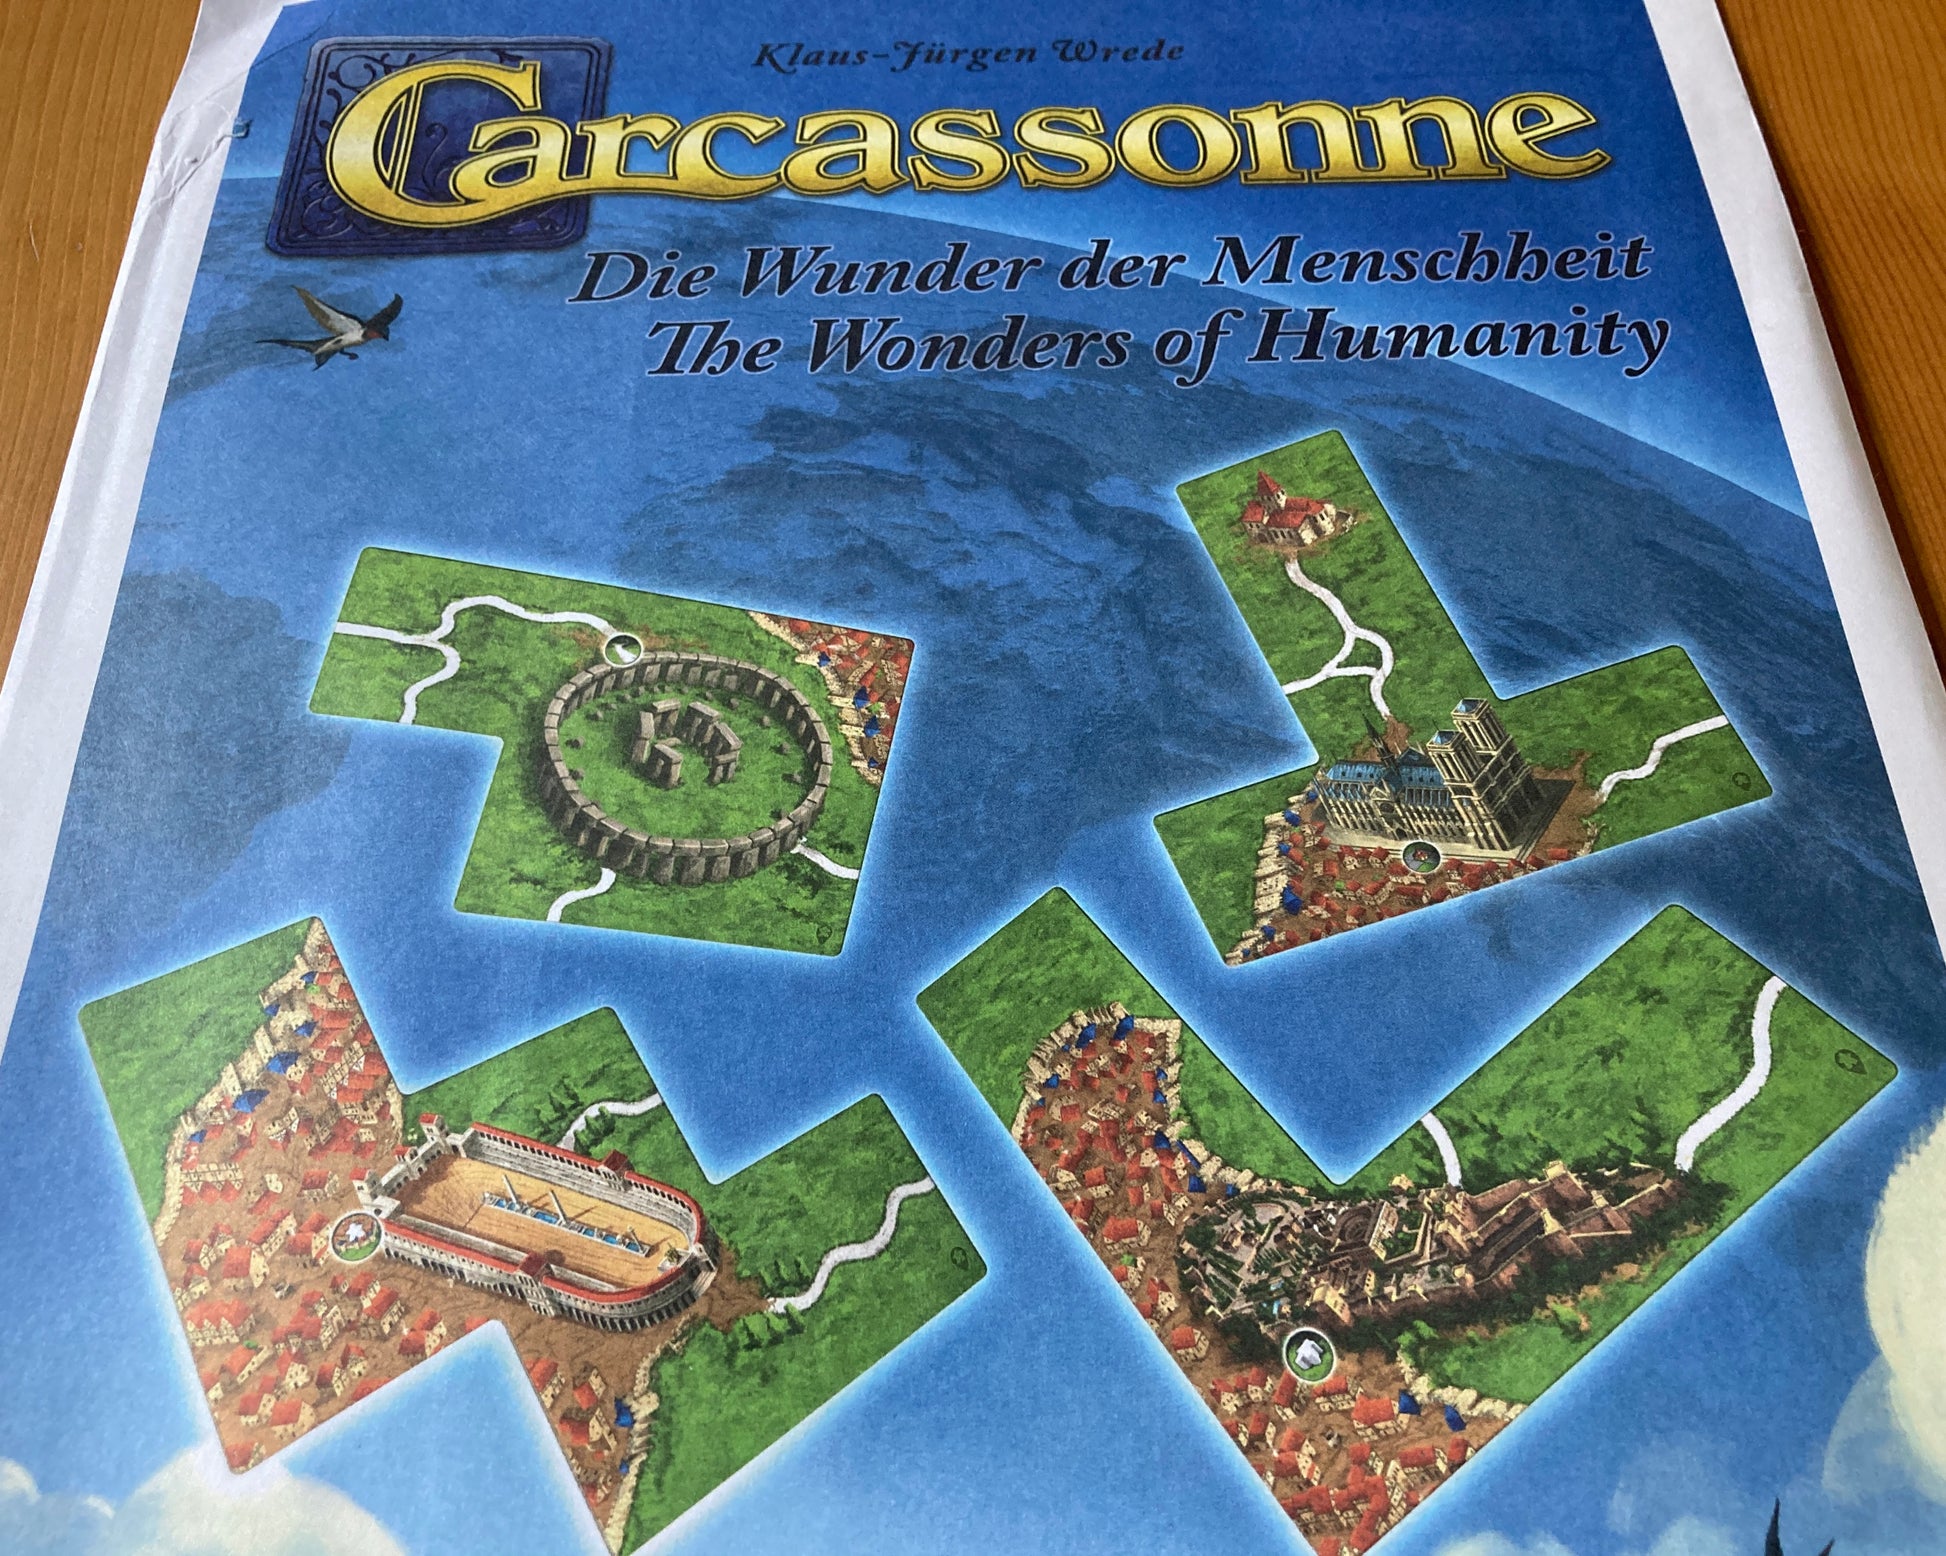 View of the envelope packaging this Wonders of Humanity mini expansion for Carcassonne comes in.